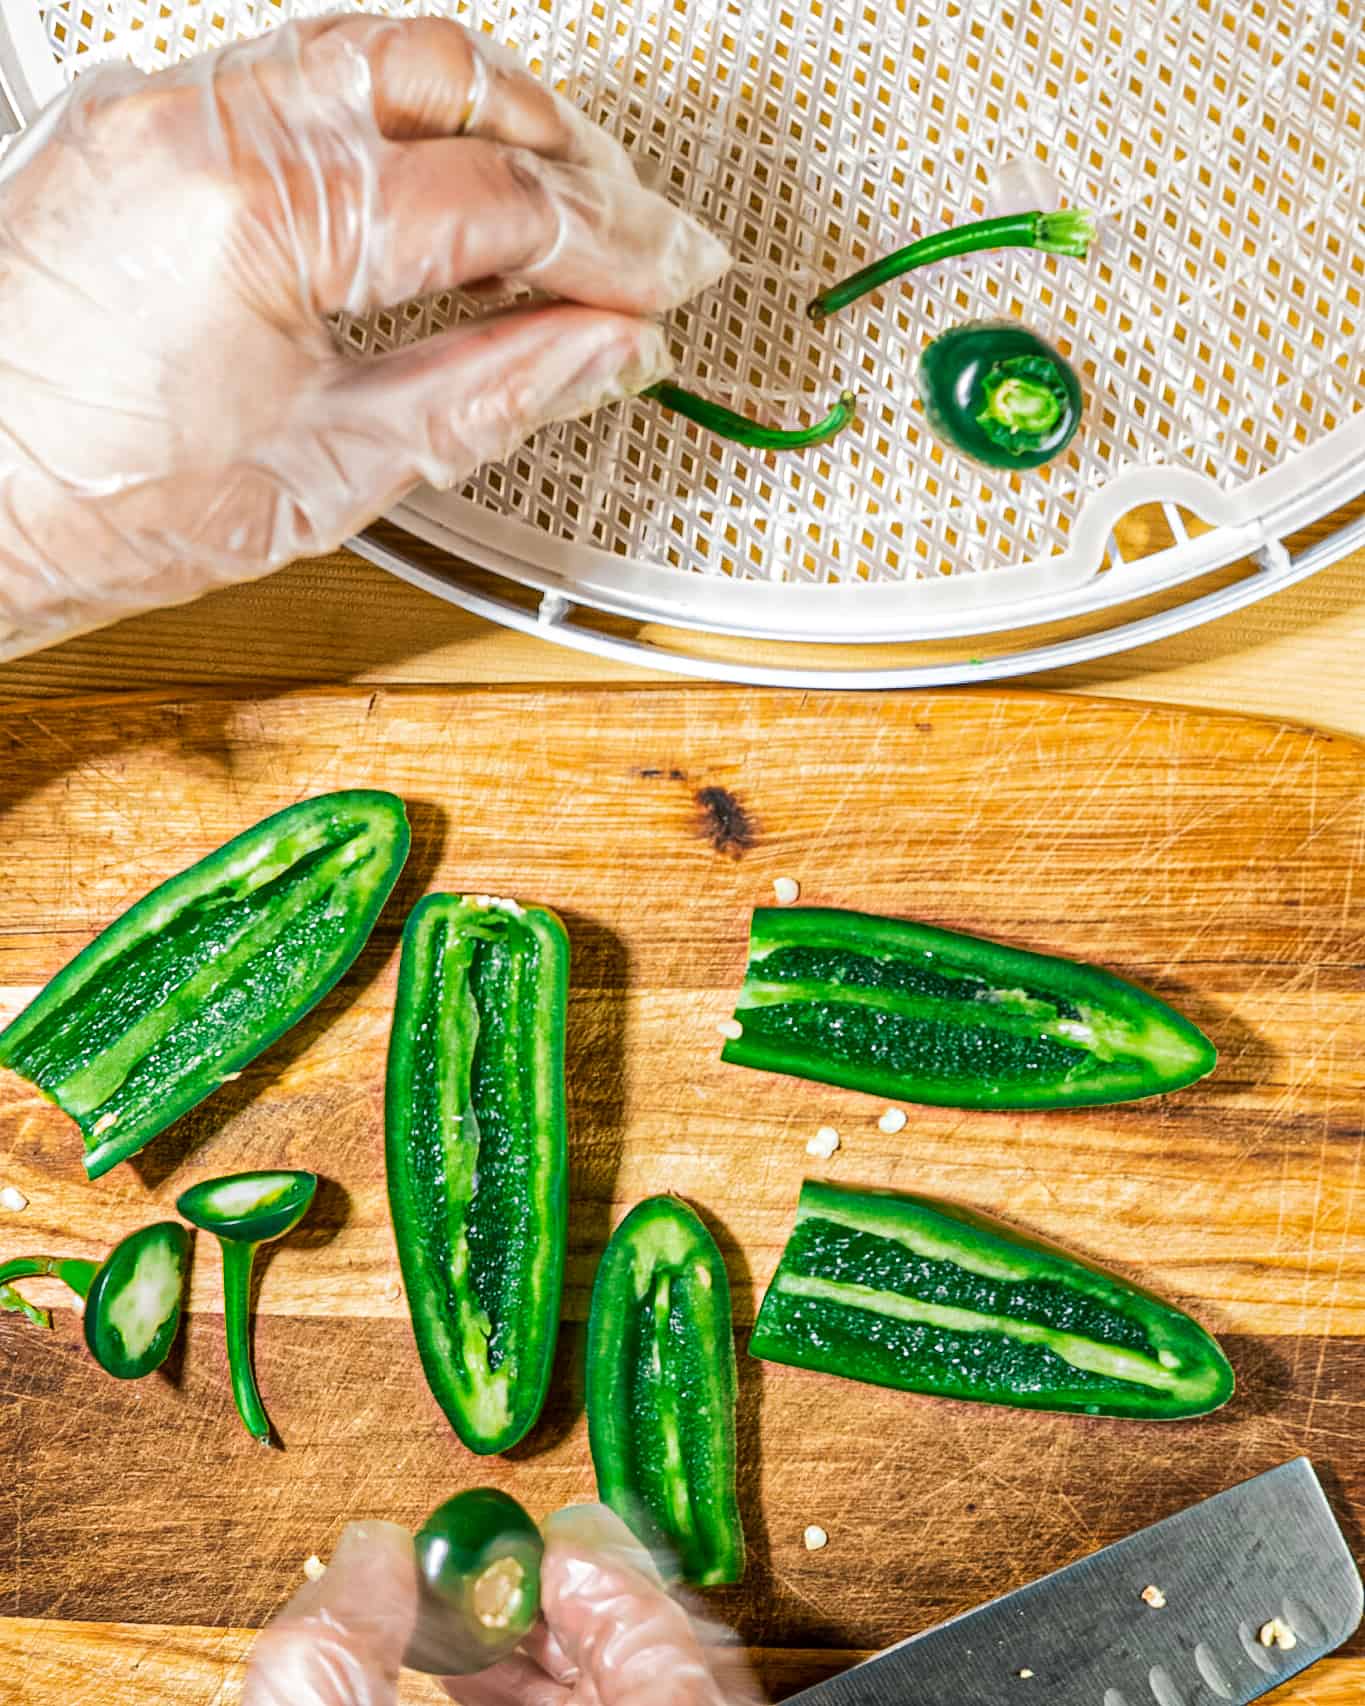 jalapeno peppers on a wooden cutting board and person placing pieces on dehydrator tray